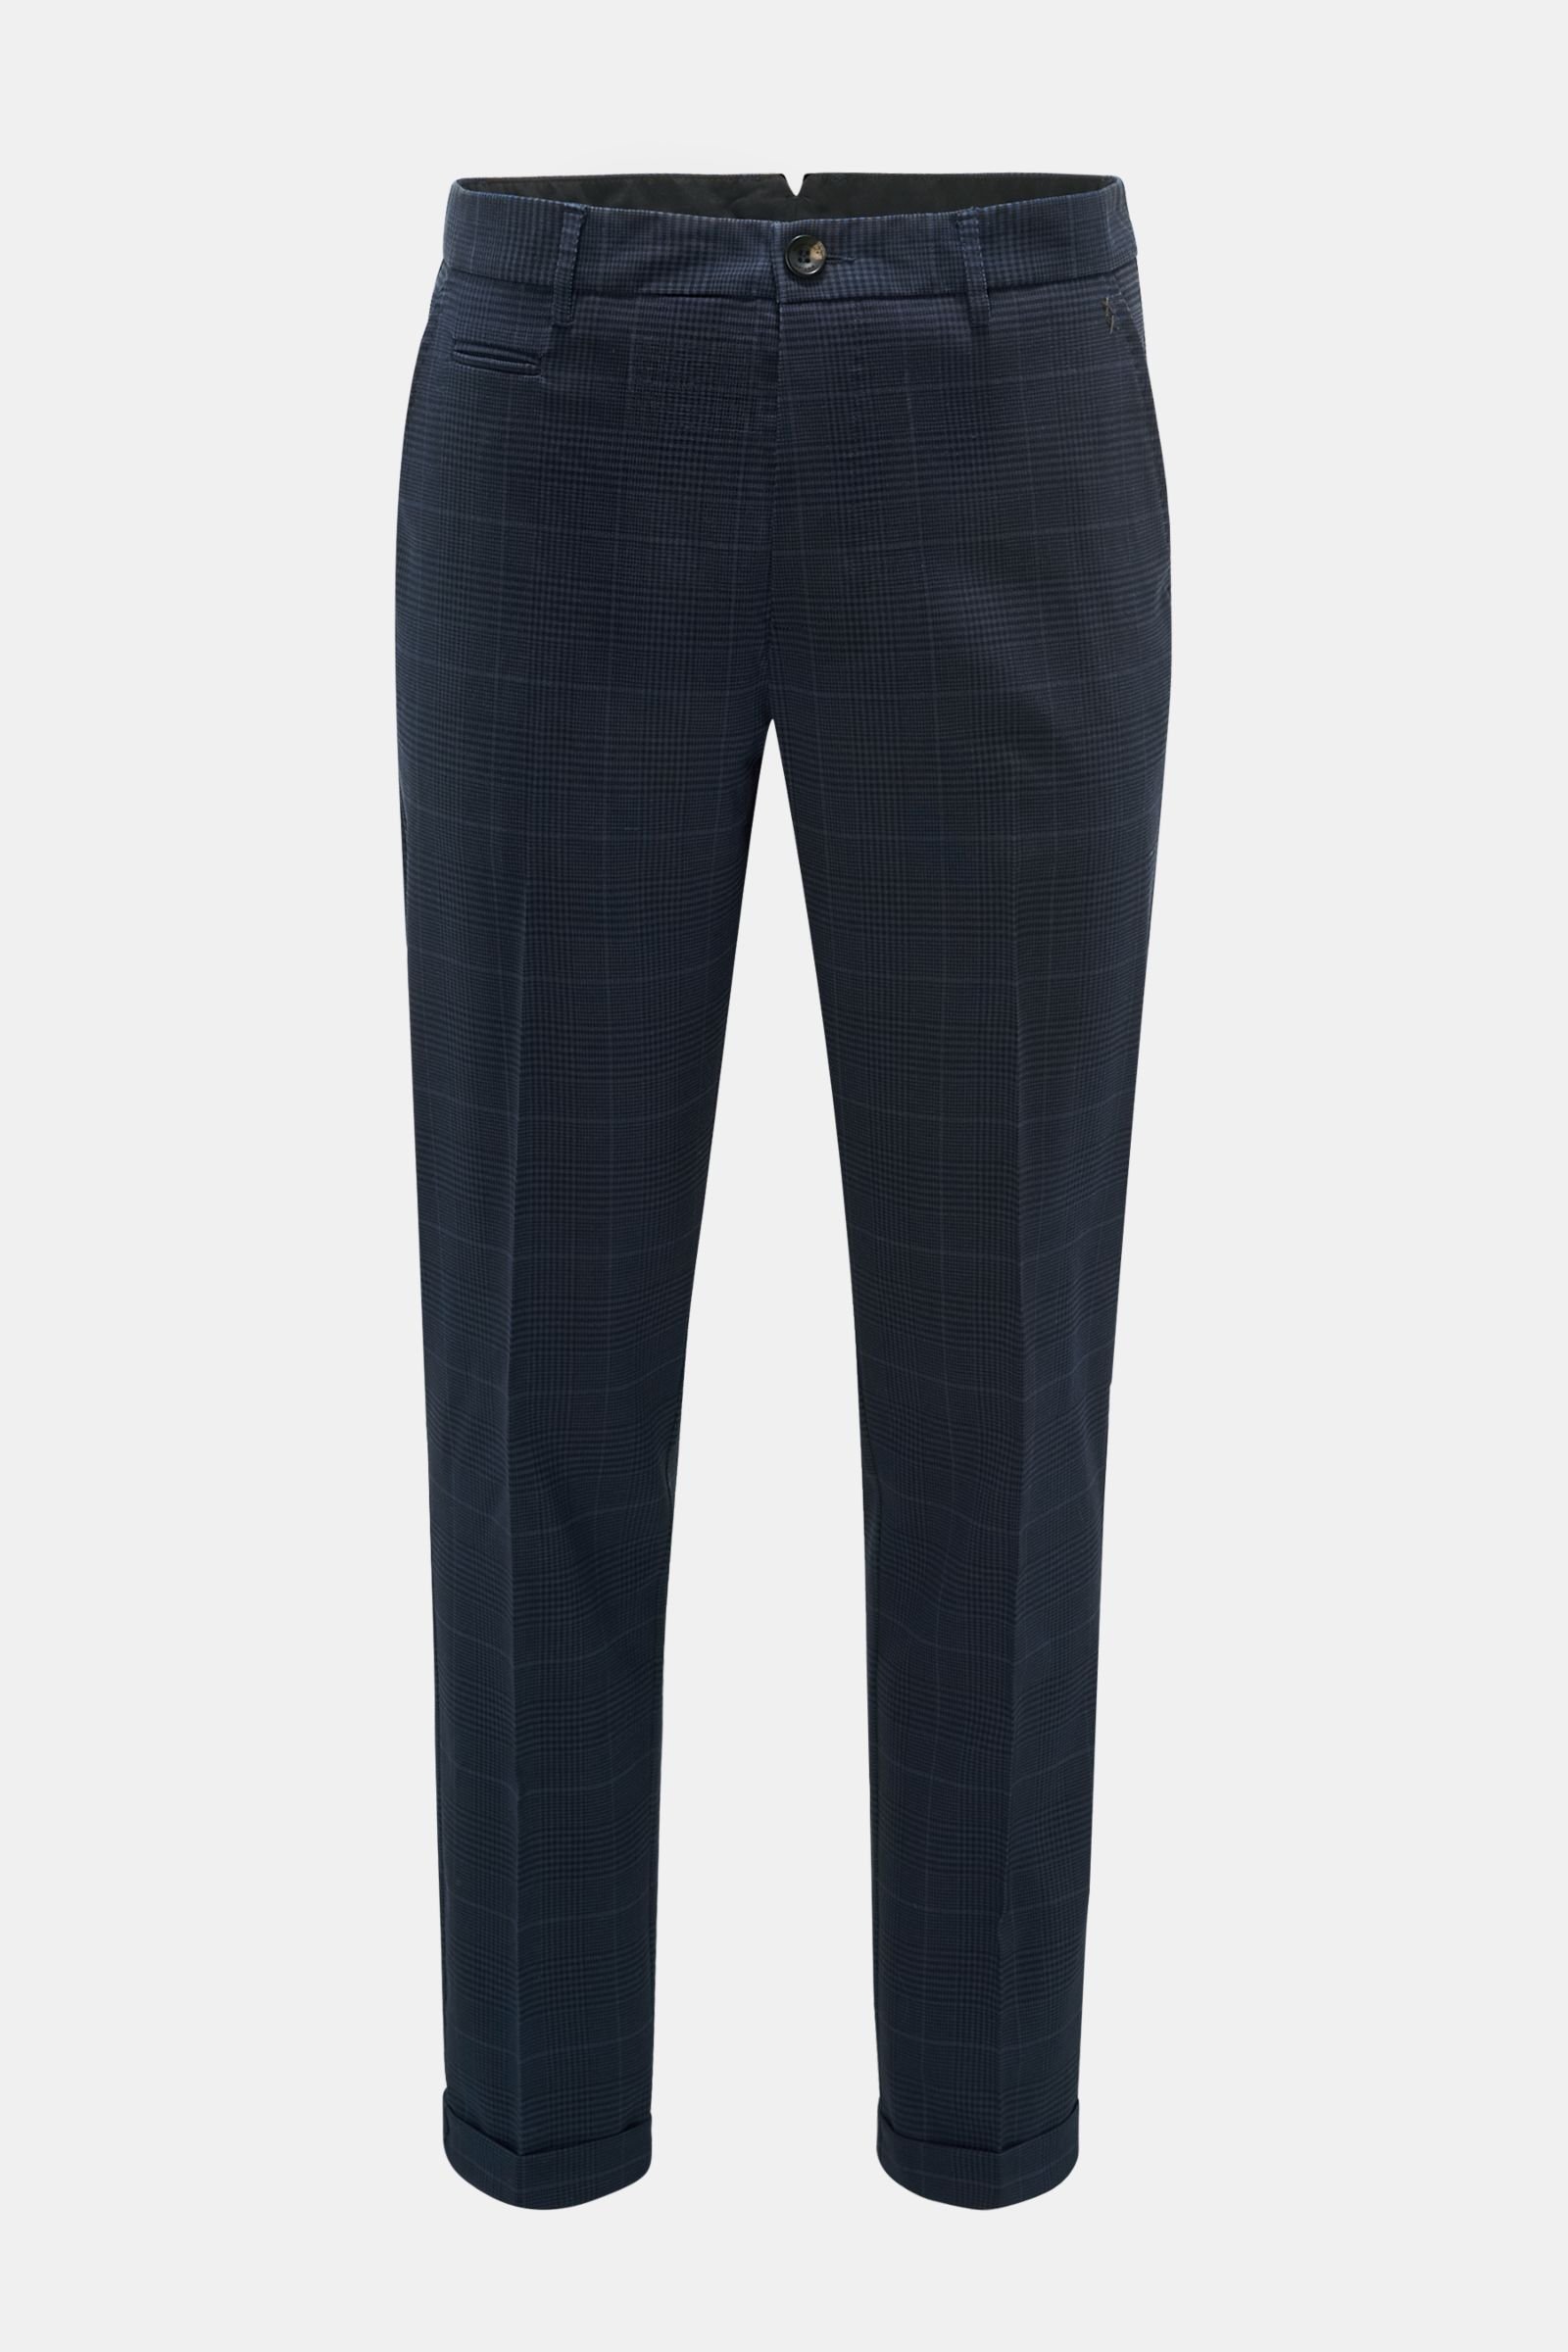 Wool trousers navy checked